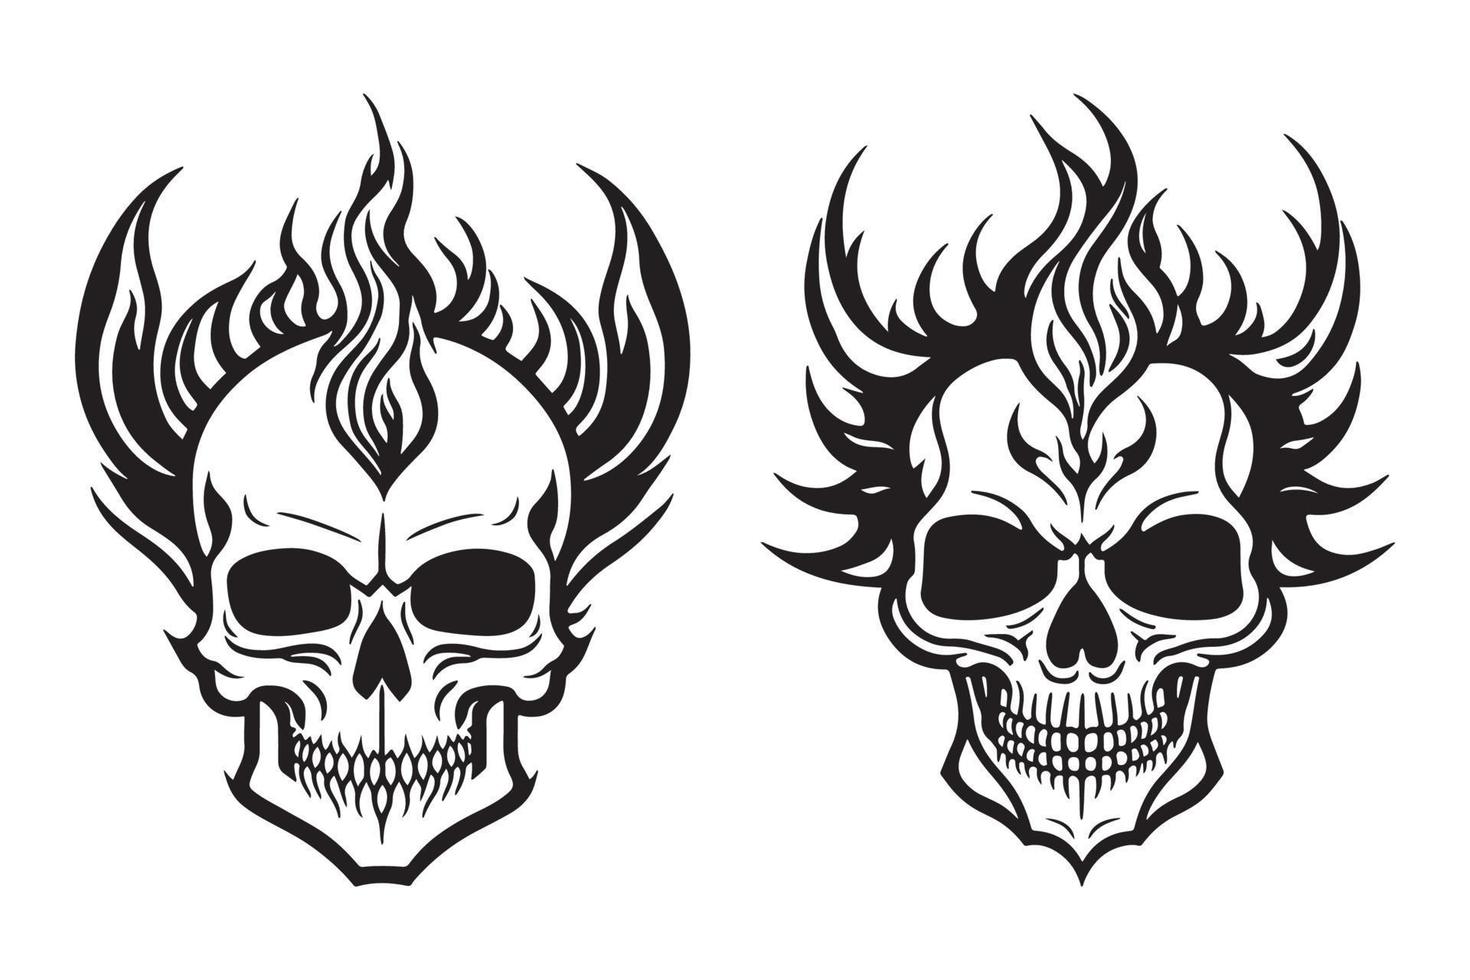 Skull with fire and smoke effect simple tattoo design black